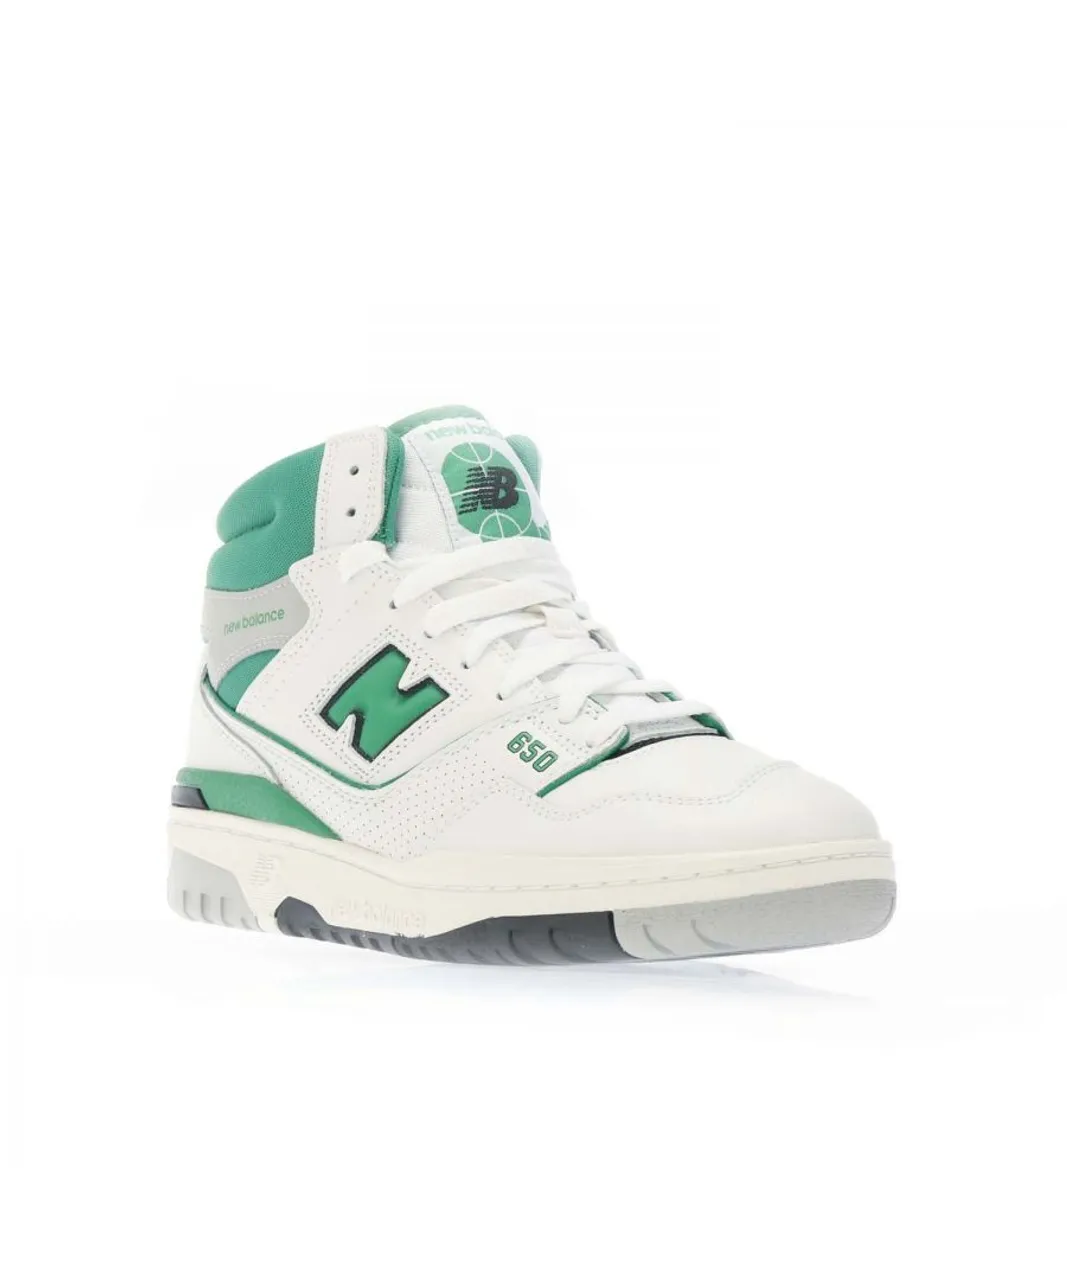 New Balance Mens 650 Trainers in White Green Leather (archived)